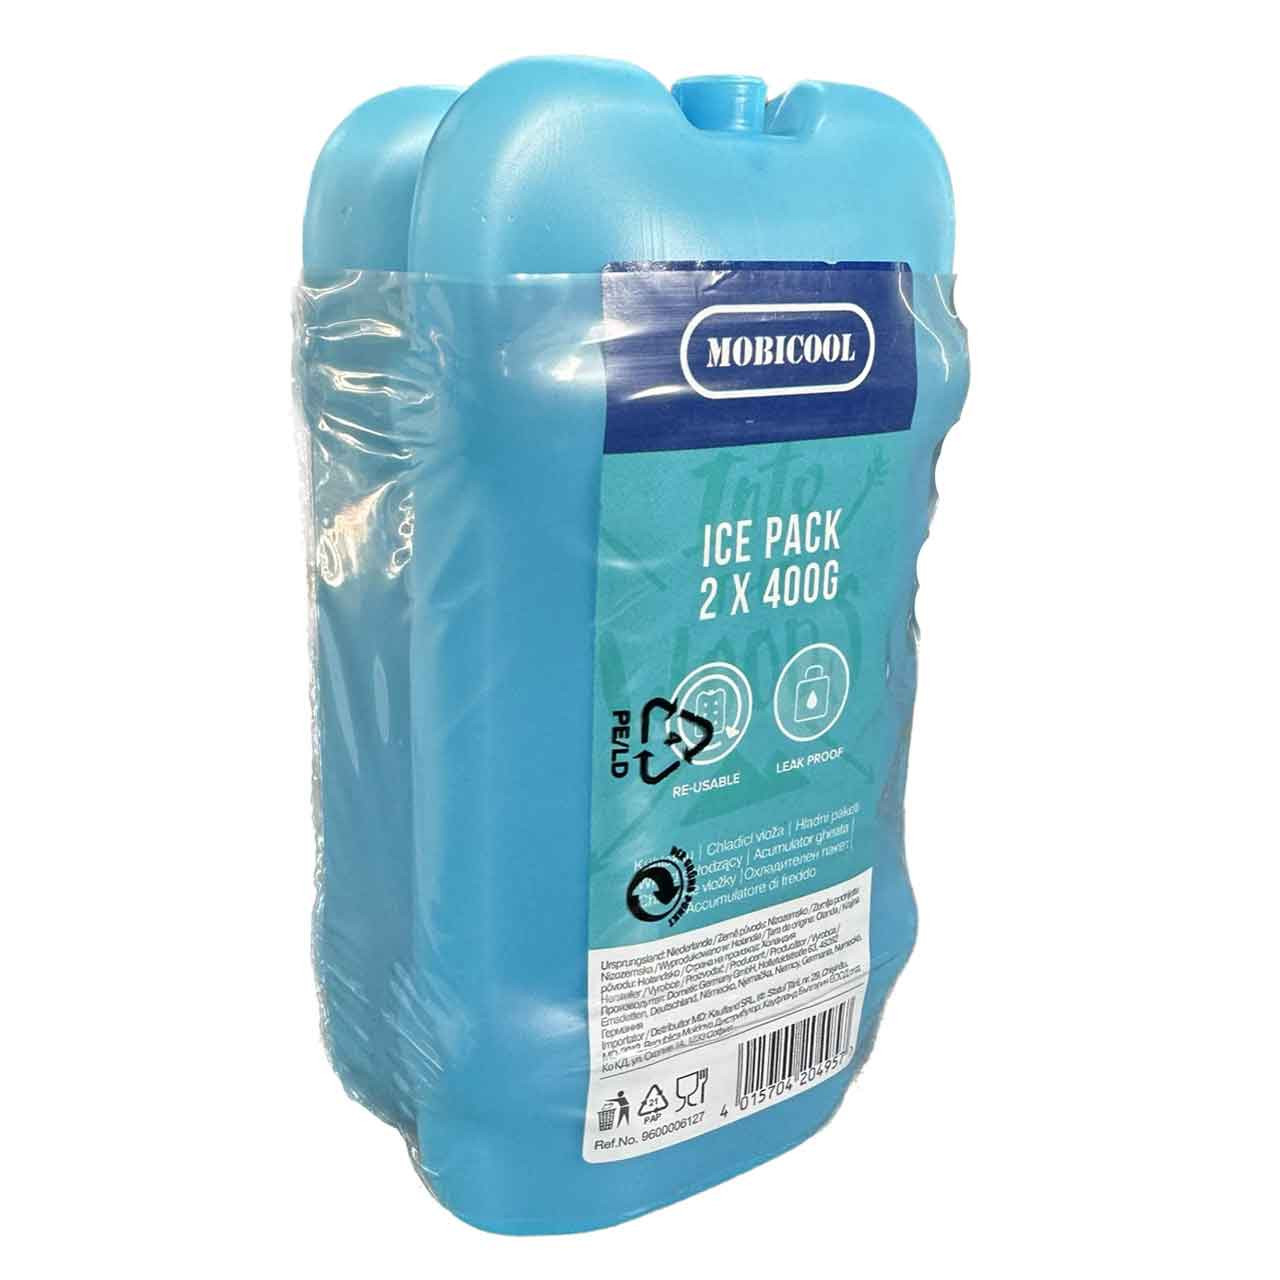 Mobicool Ice Pack 2 x 400g